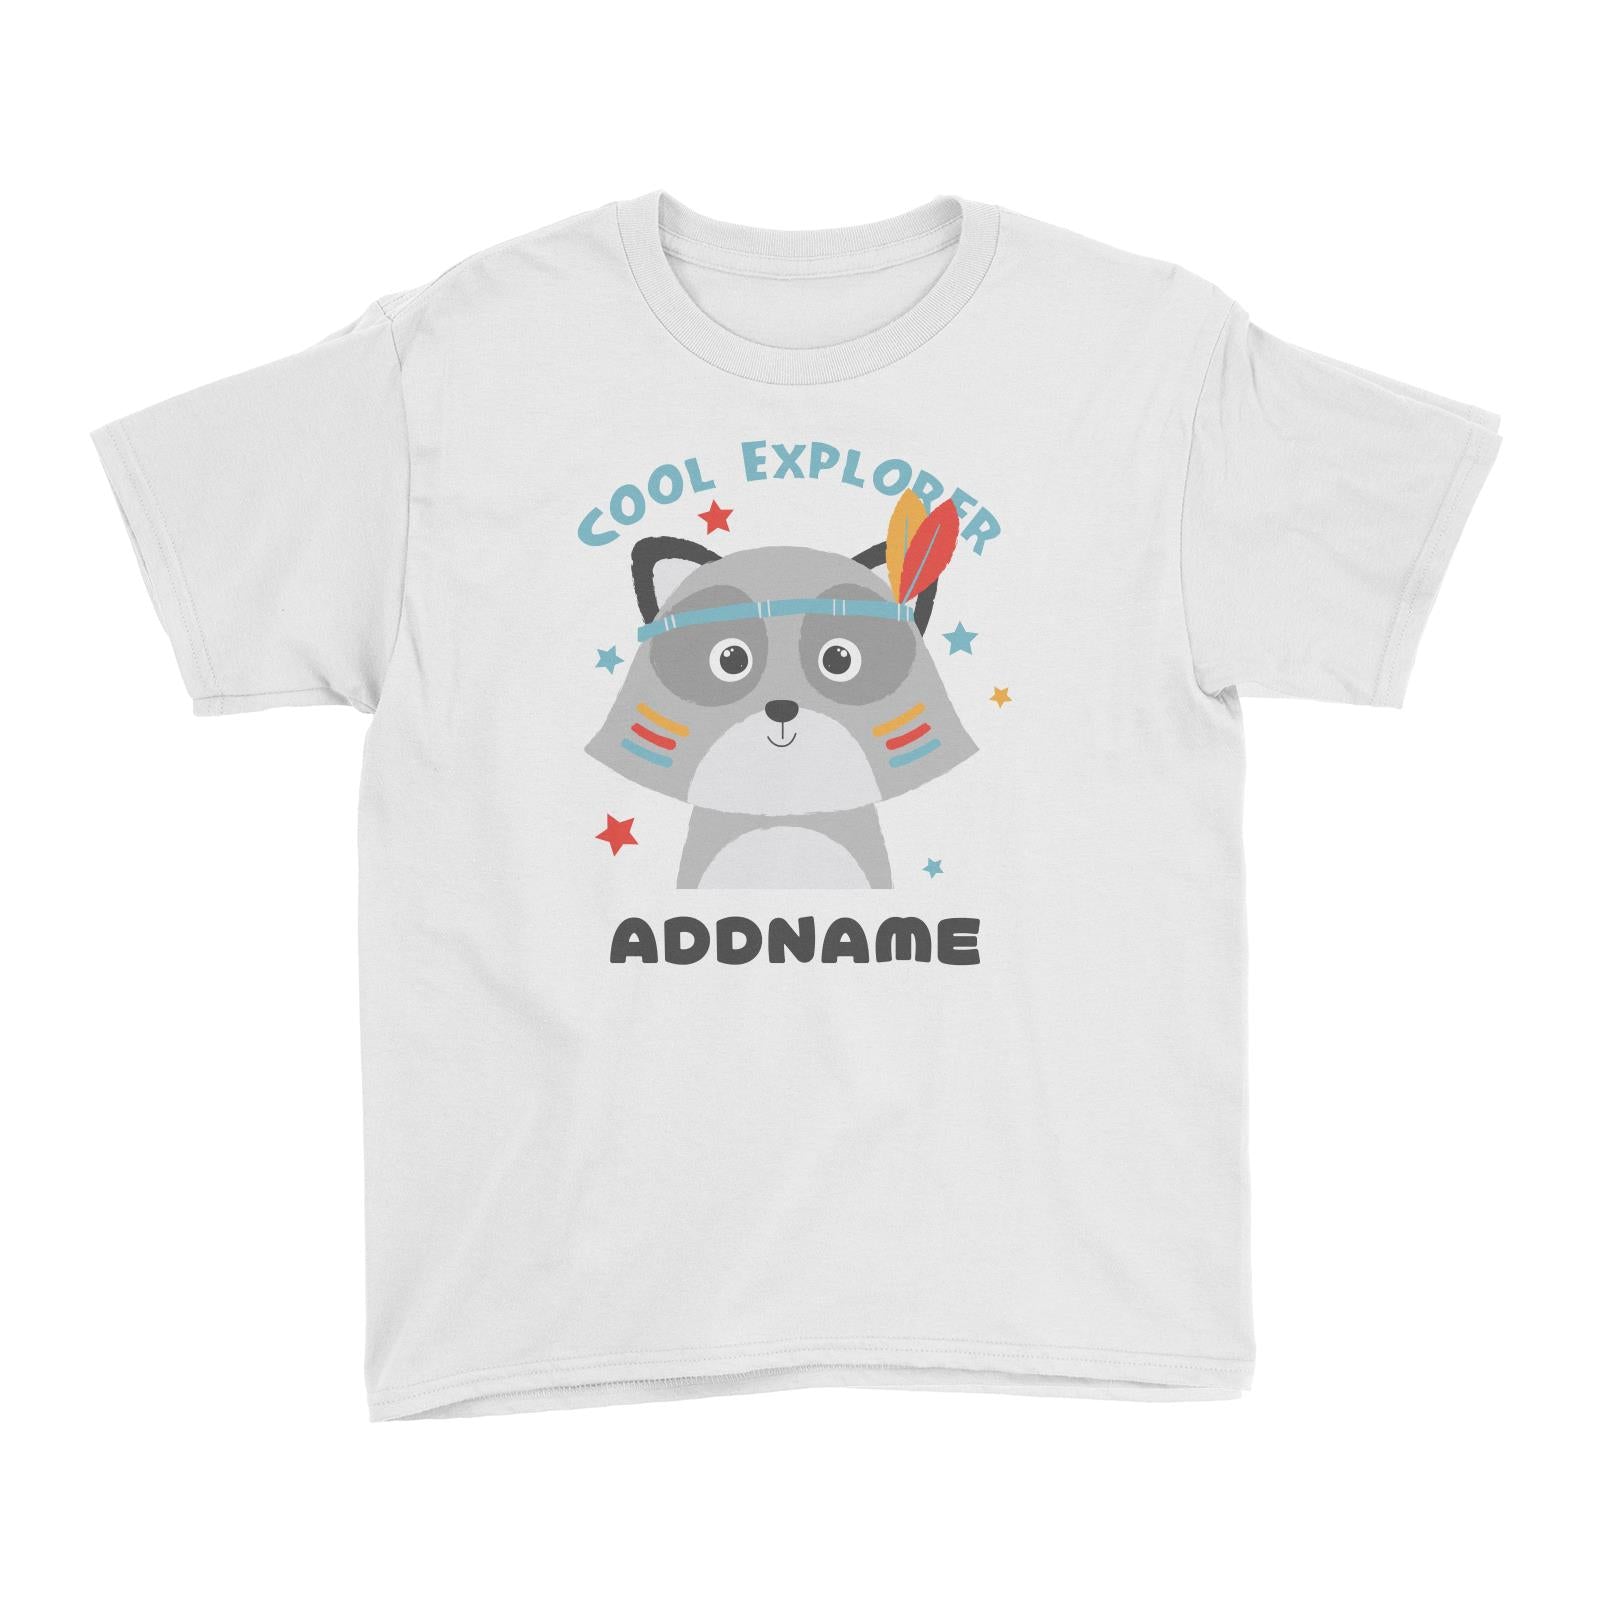 Cool Explorer Racoon Addname White Kid's T-Shirt